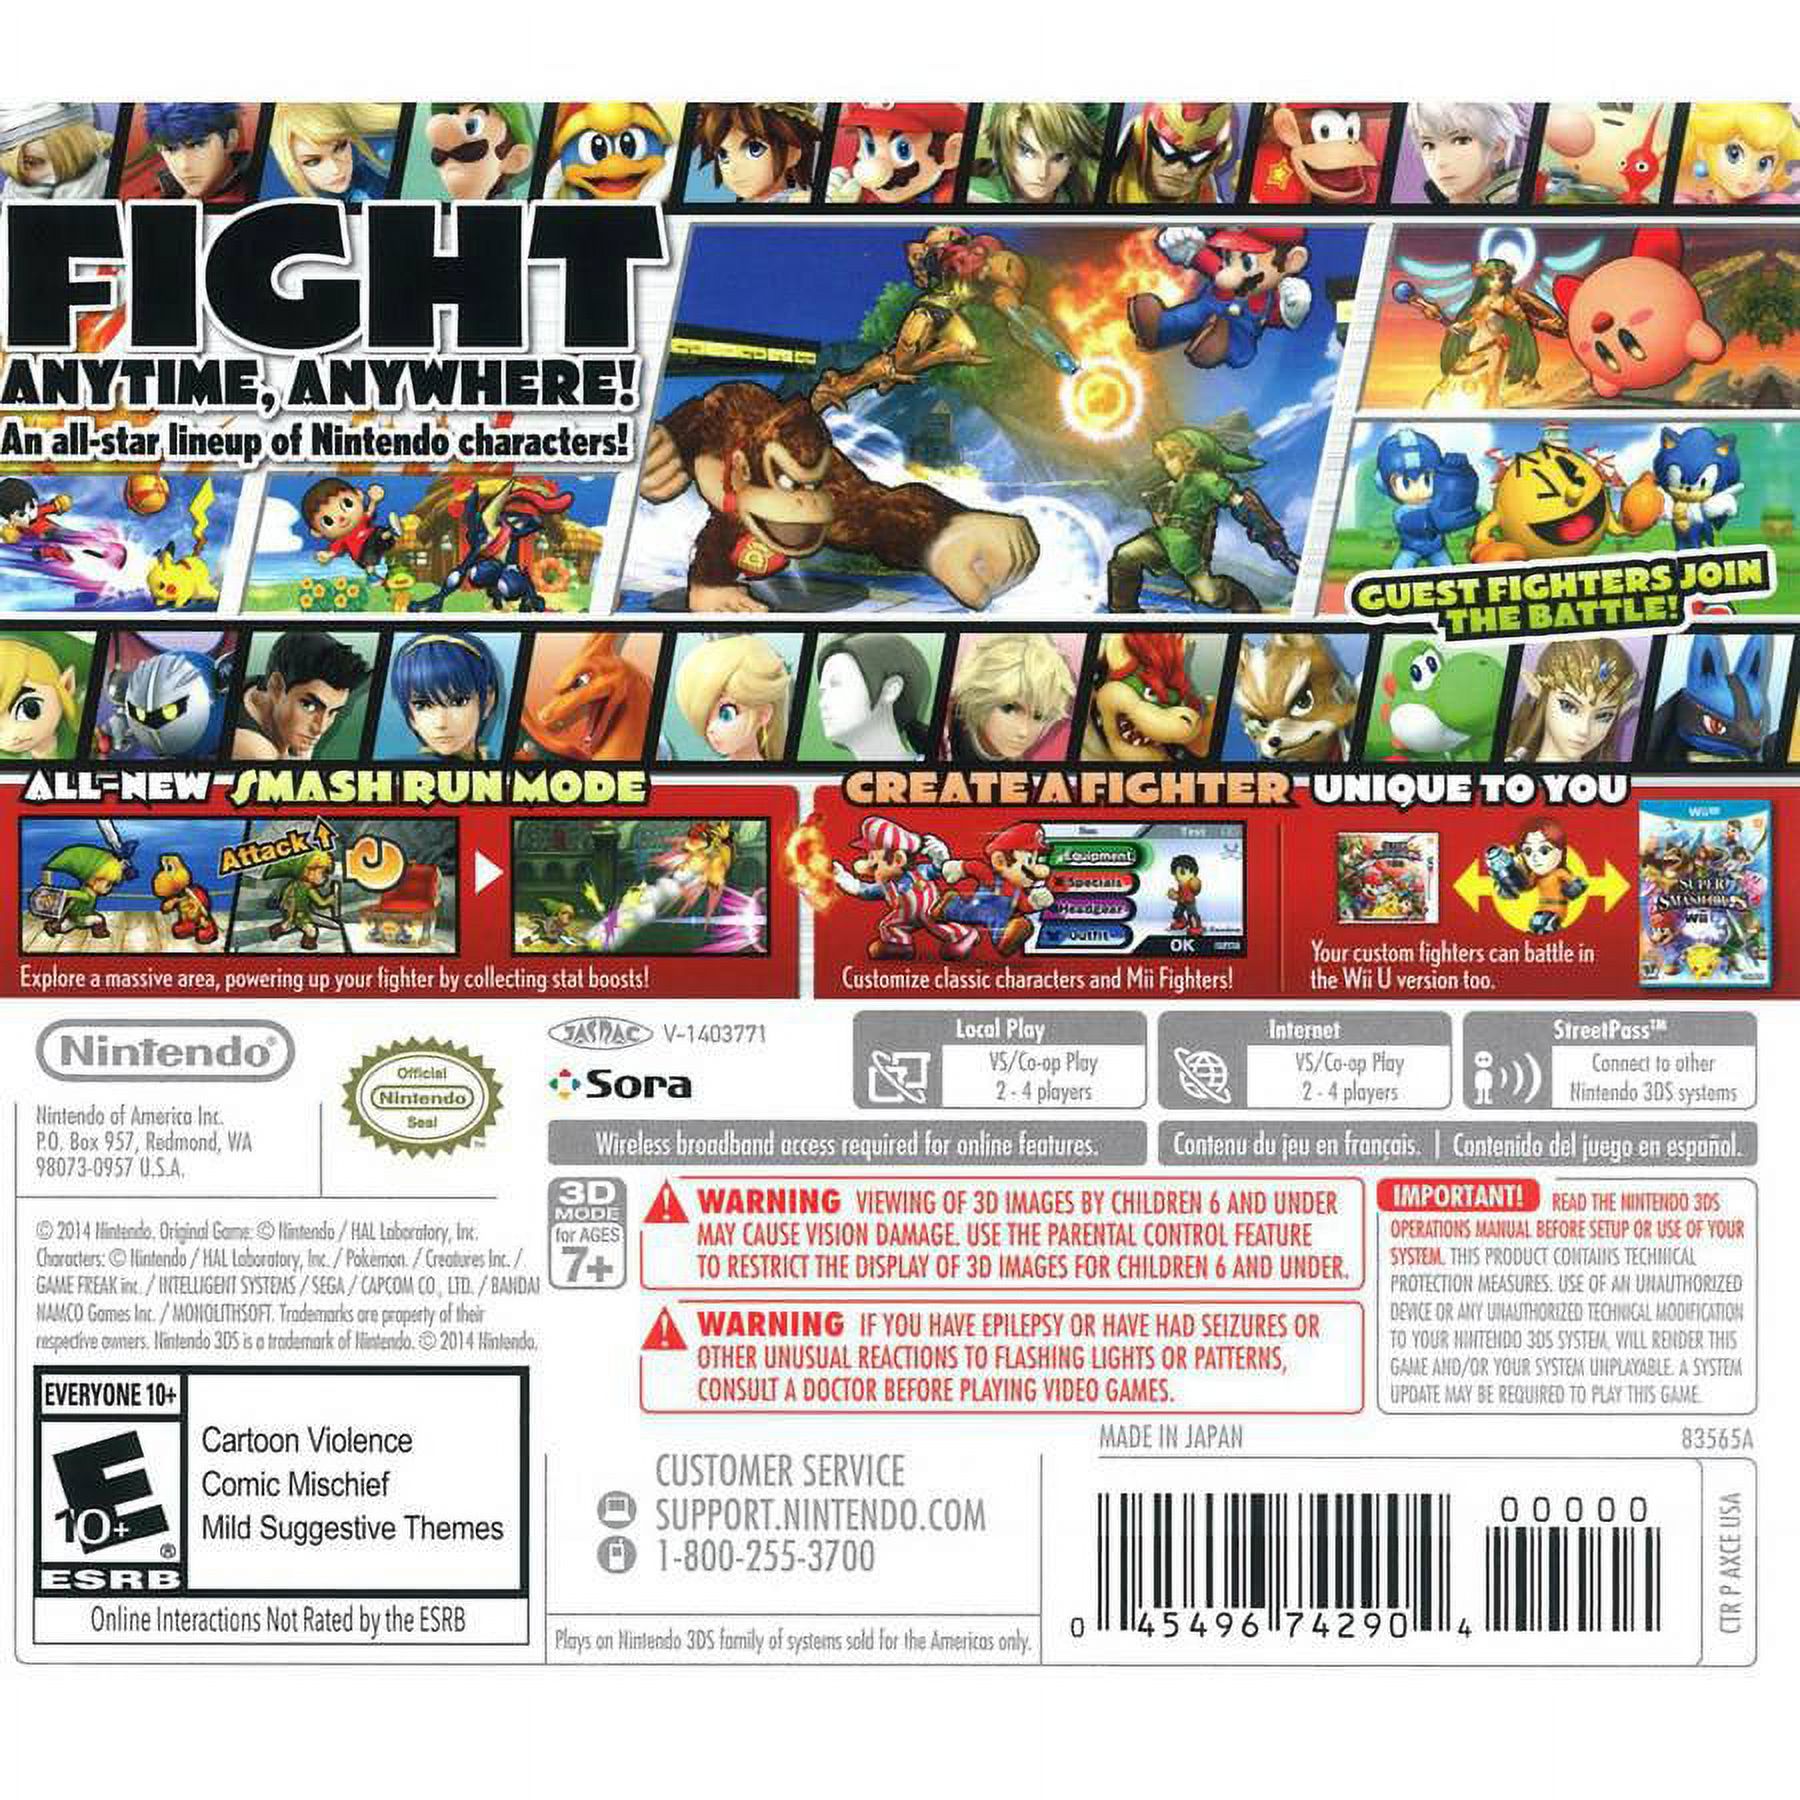 Super Smash Bros., Nintendo 3DS, [Physical Edition], 045496742904 - image 2 of 32